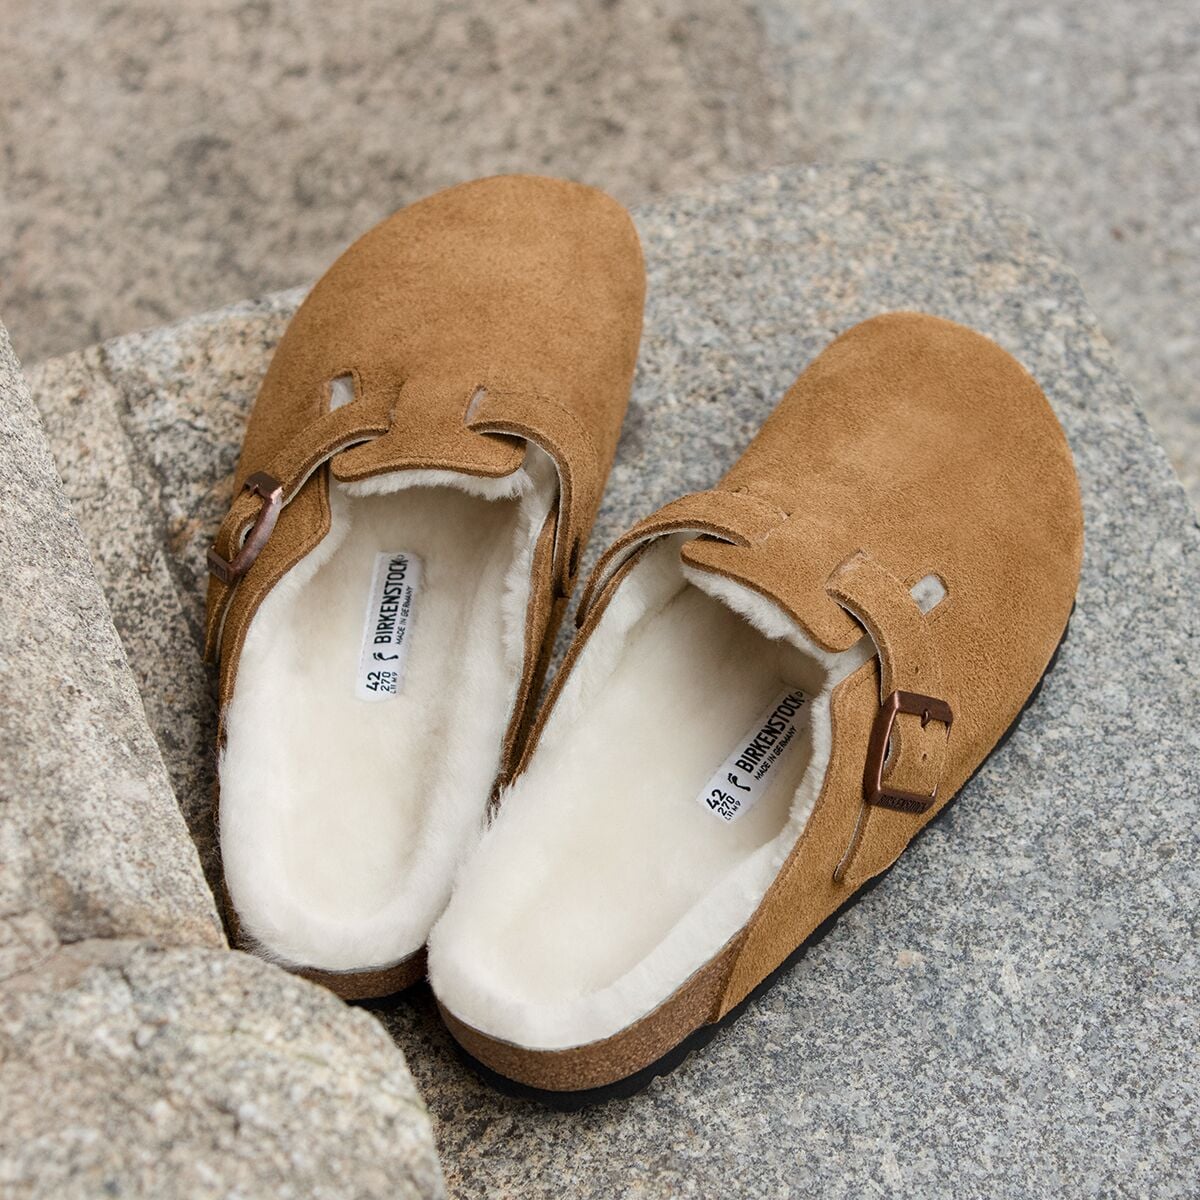 BIRKENSTOCK: SHOES BOOTS AND SLIPPERS, BIRKENSTOCK BOSTON SHEARLING SLIPPERS